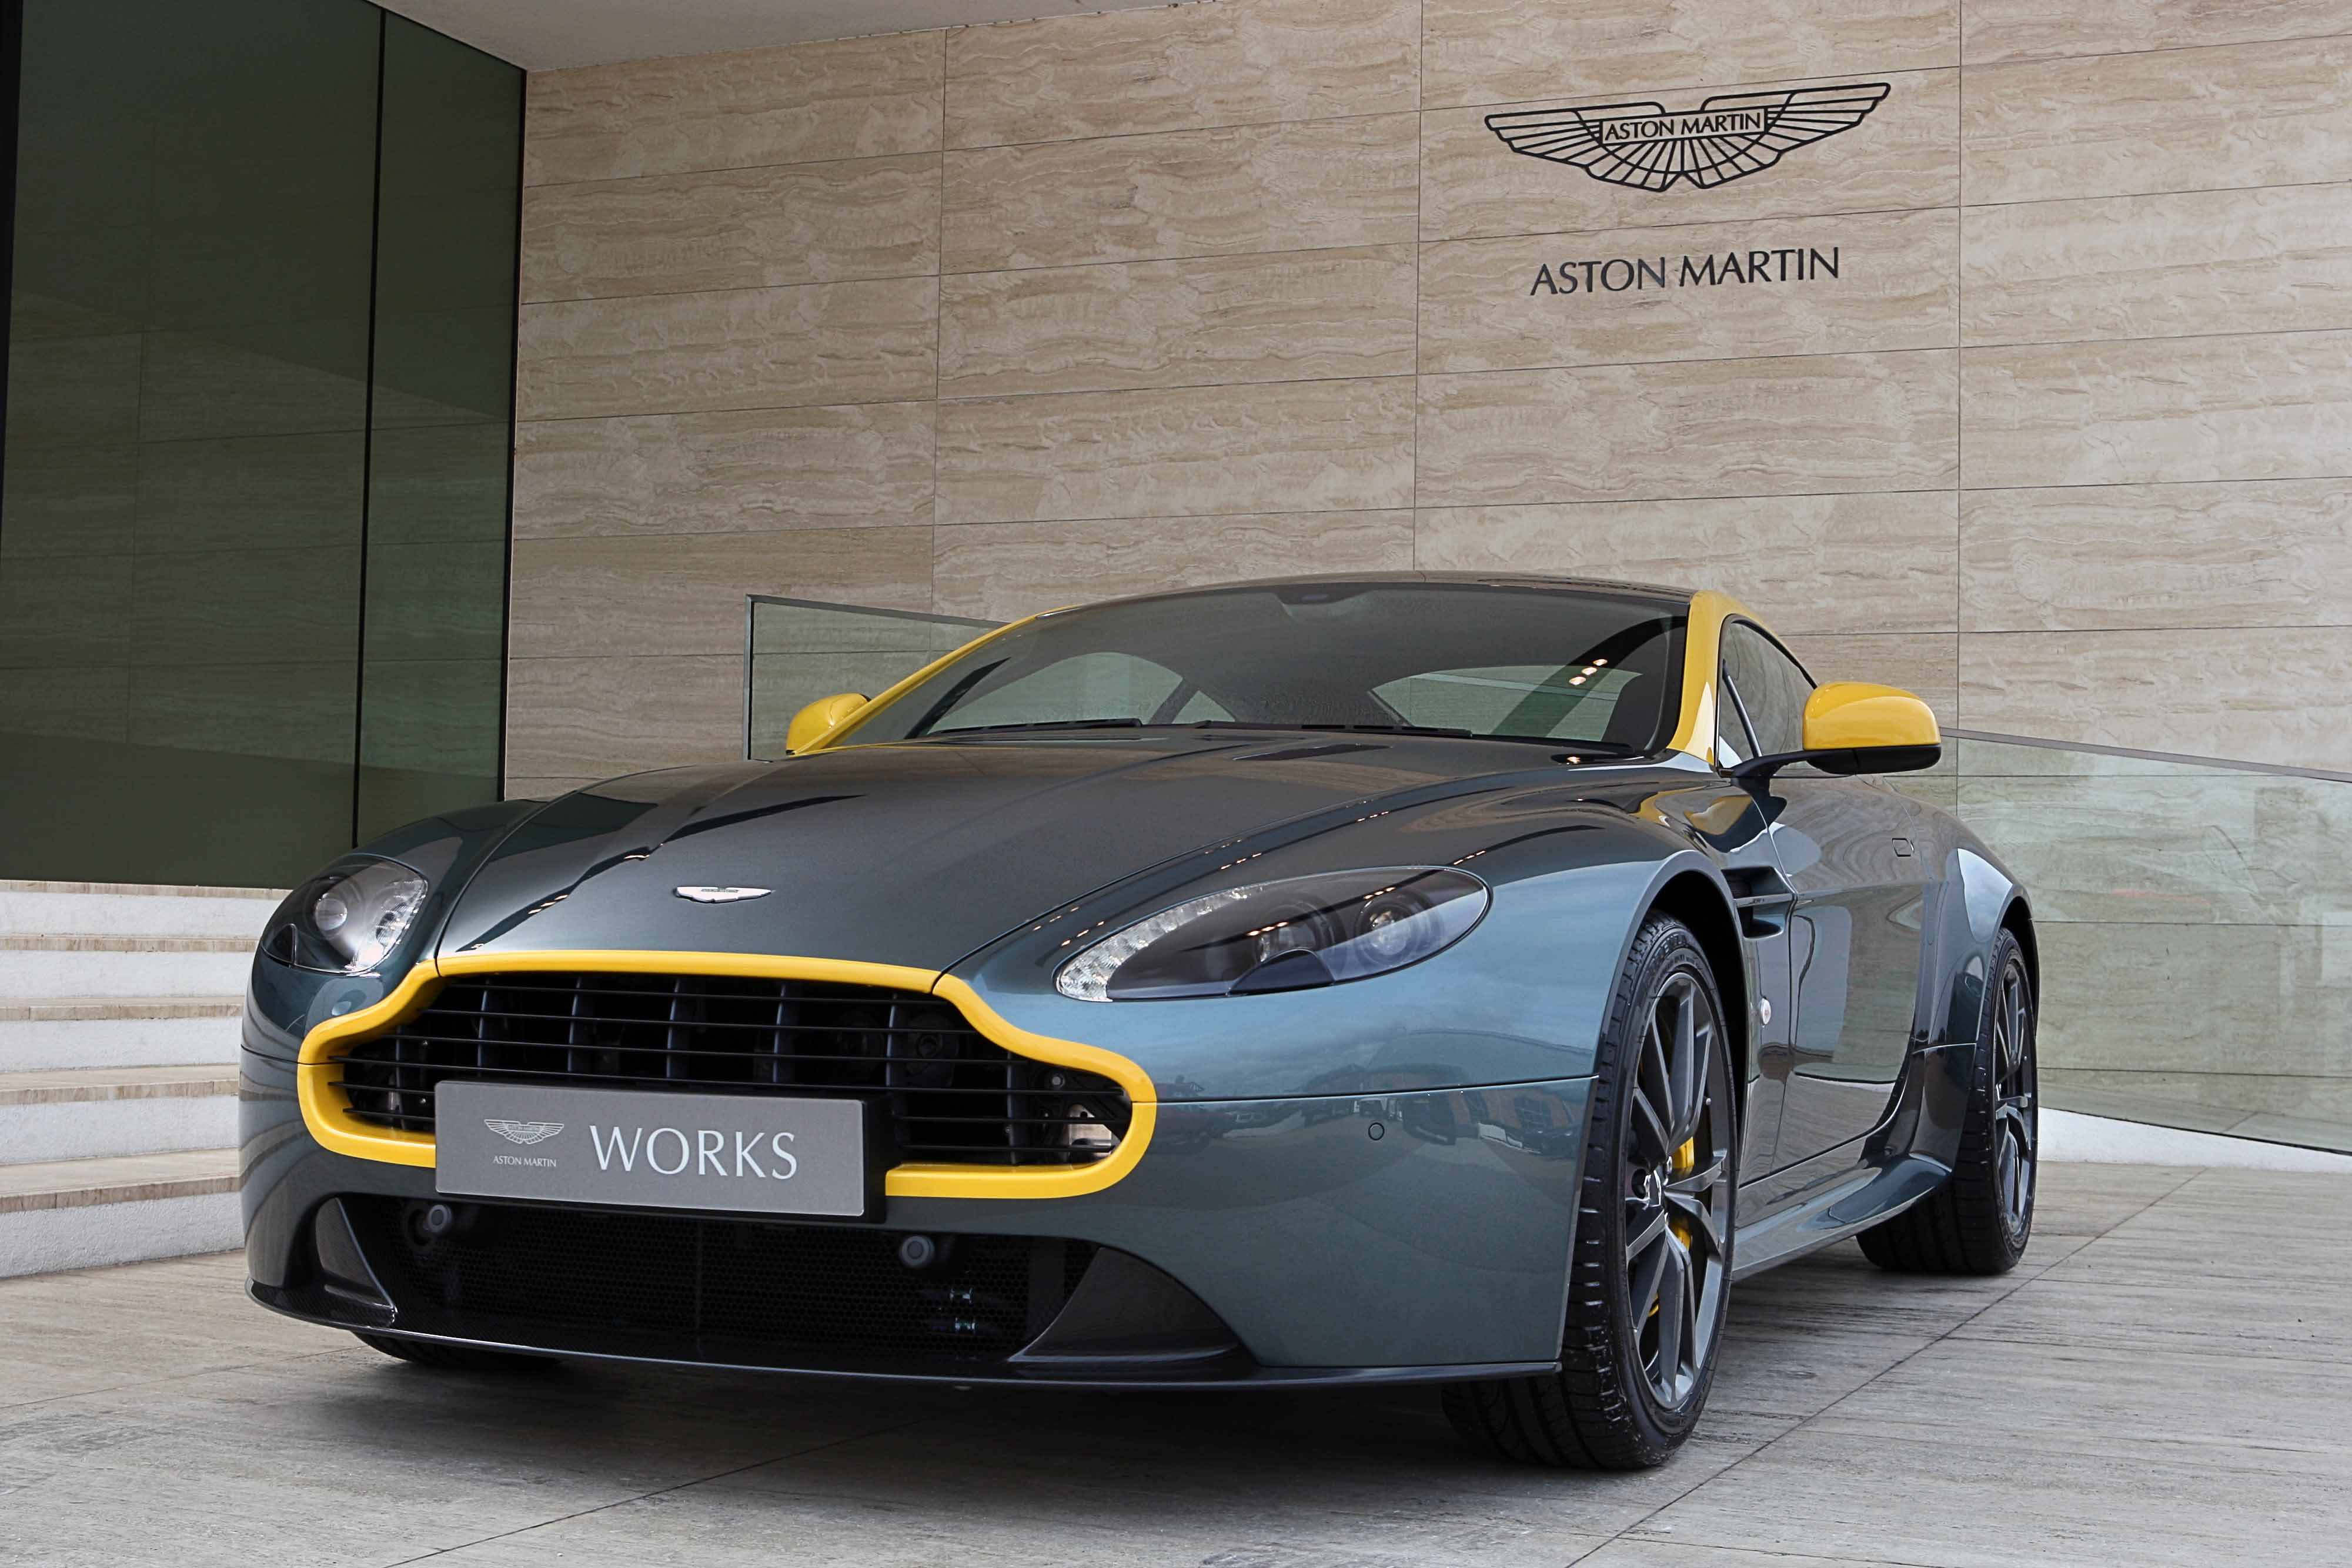 Getting Your Pension Why Not Buy An Aston Martin!